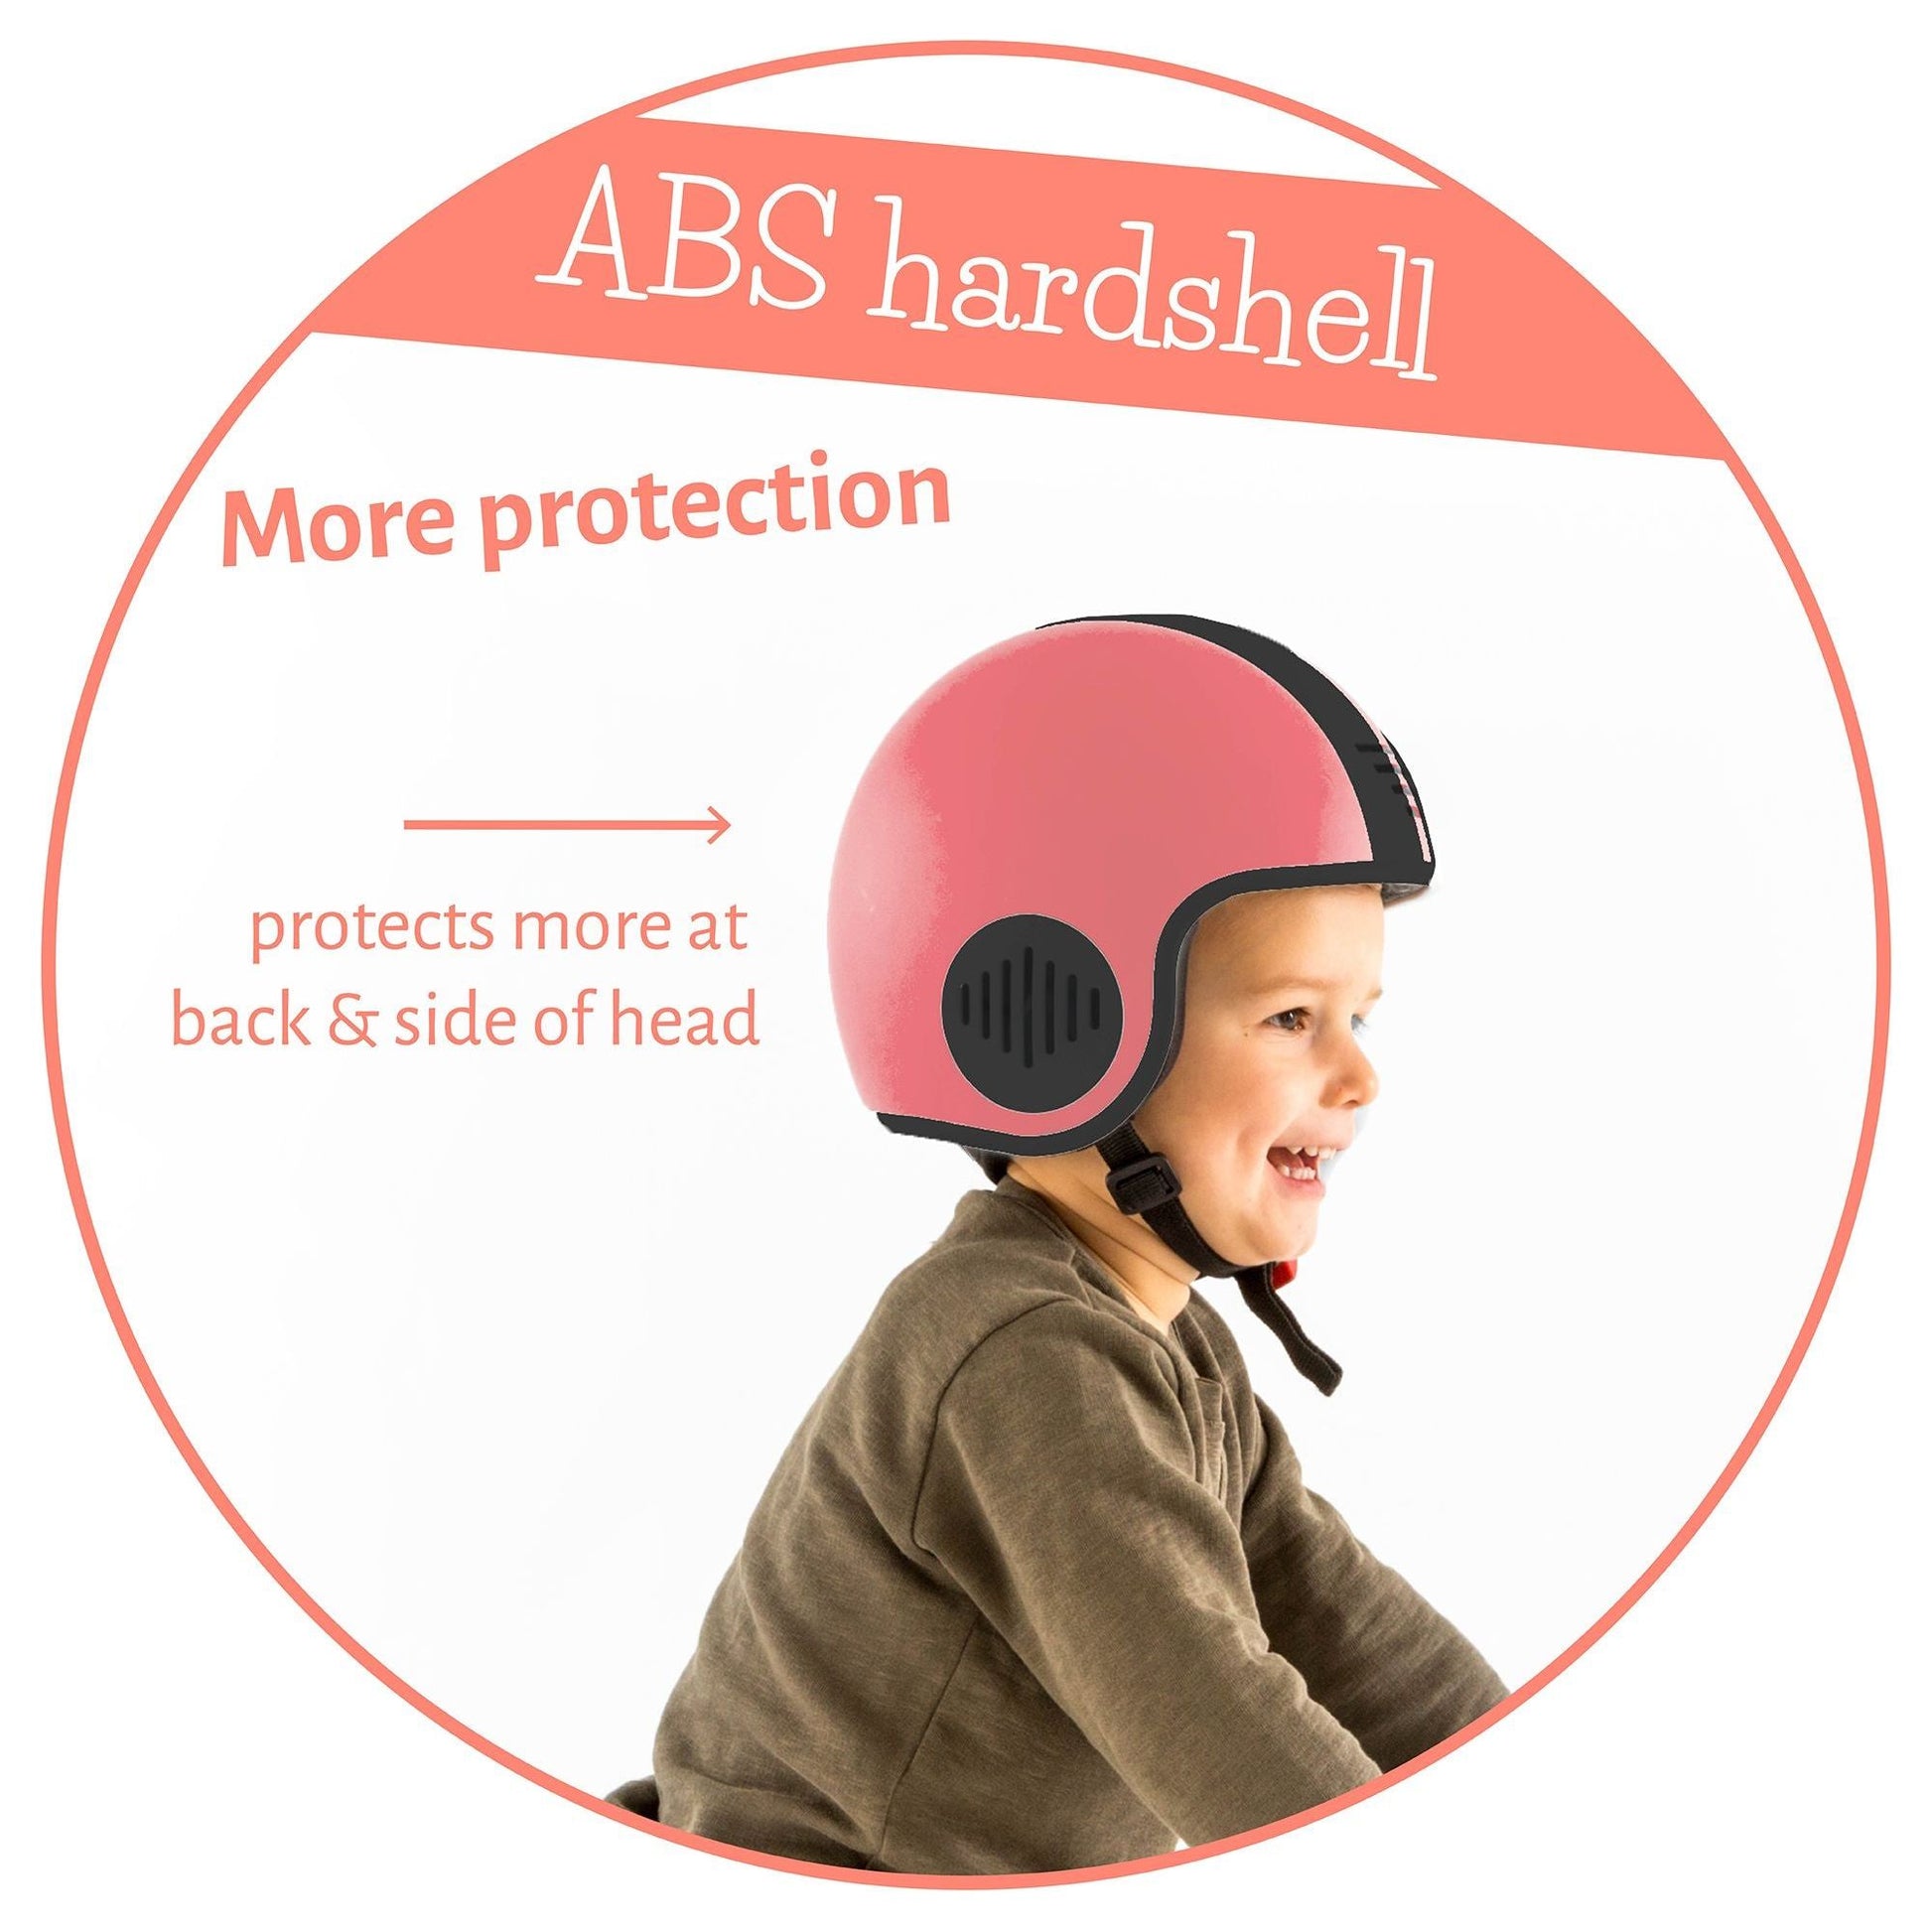 Chillafish kids Helmet Bobbi XS Rose with ABS hardshell for more protection